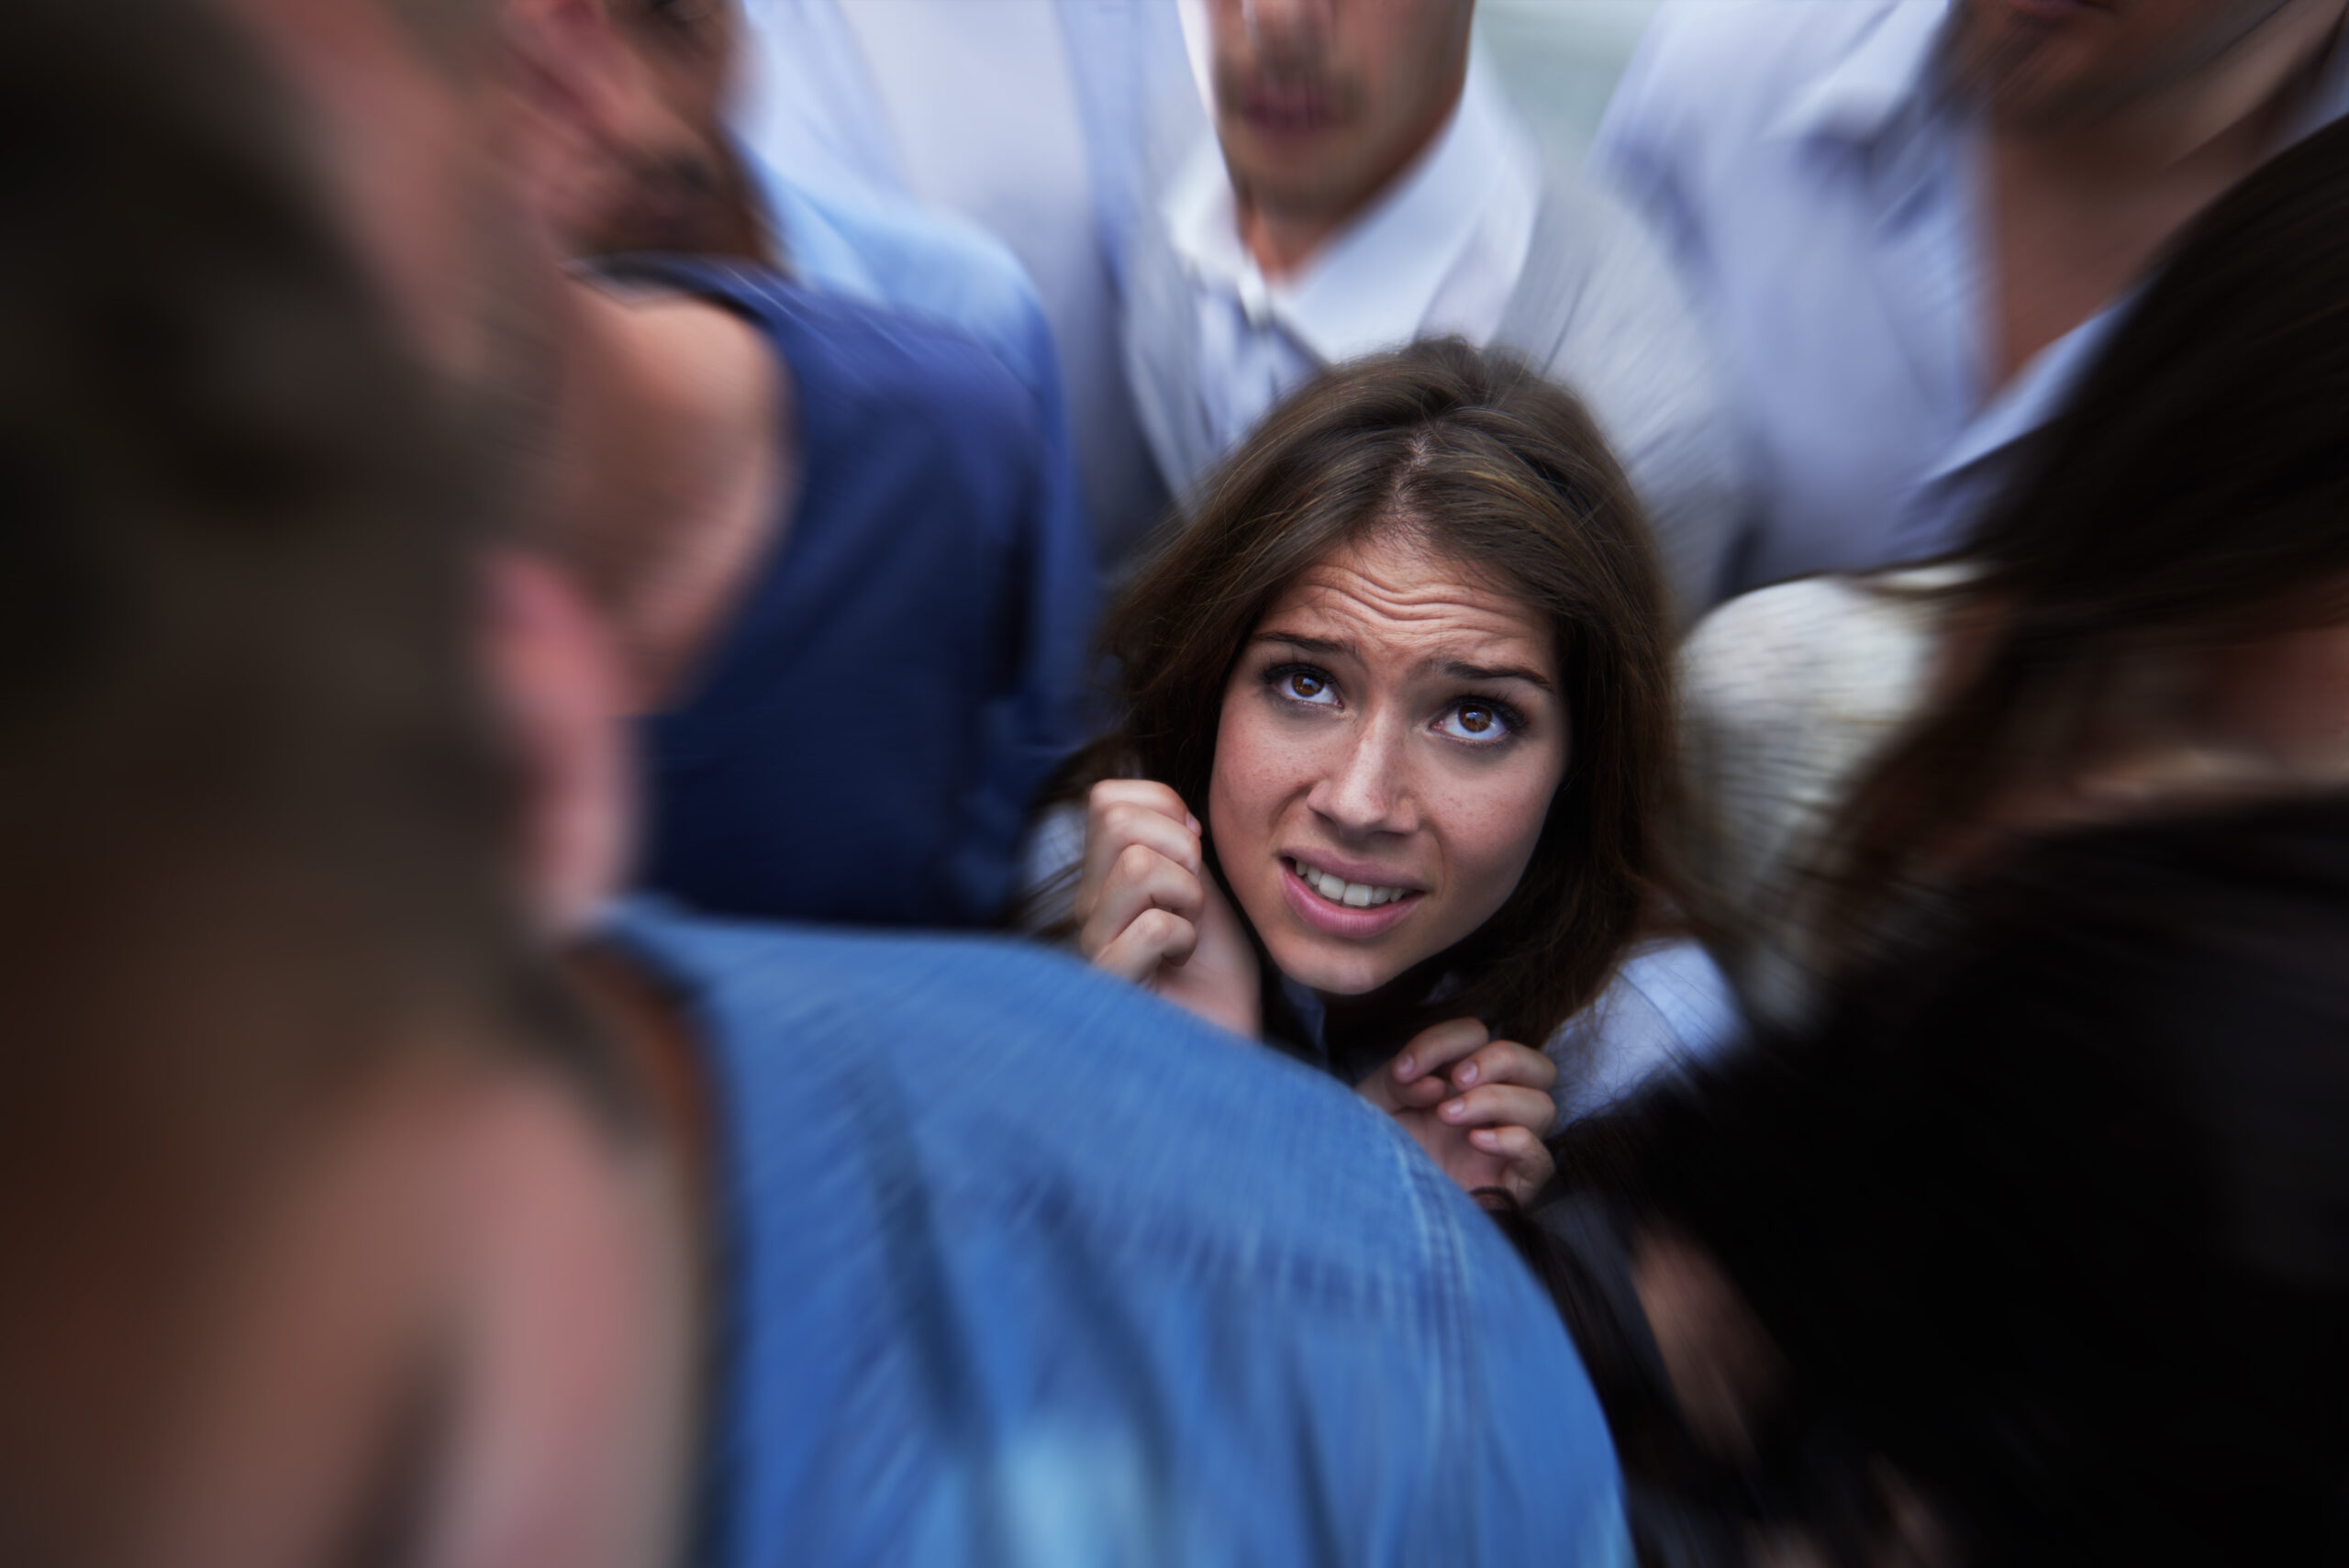 Drowning in people. Shot of a fearful young woman feeling trapped by the crowd